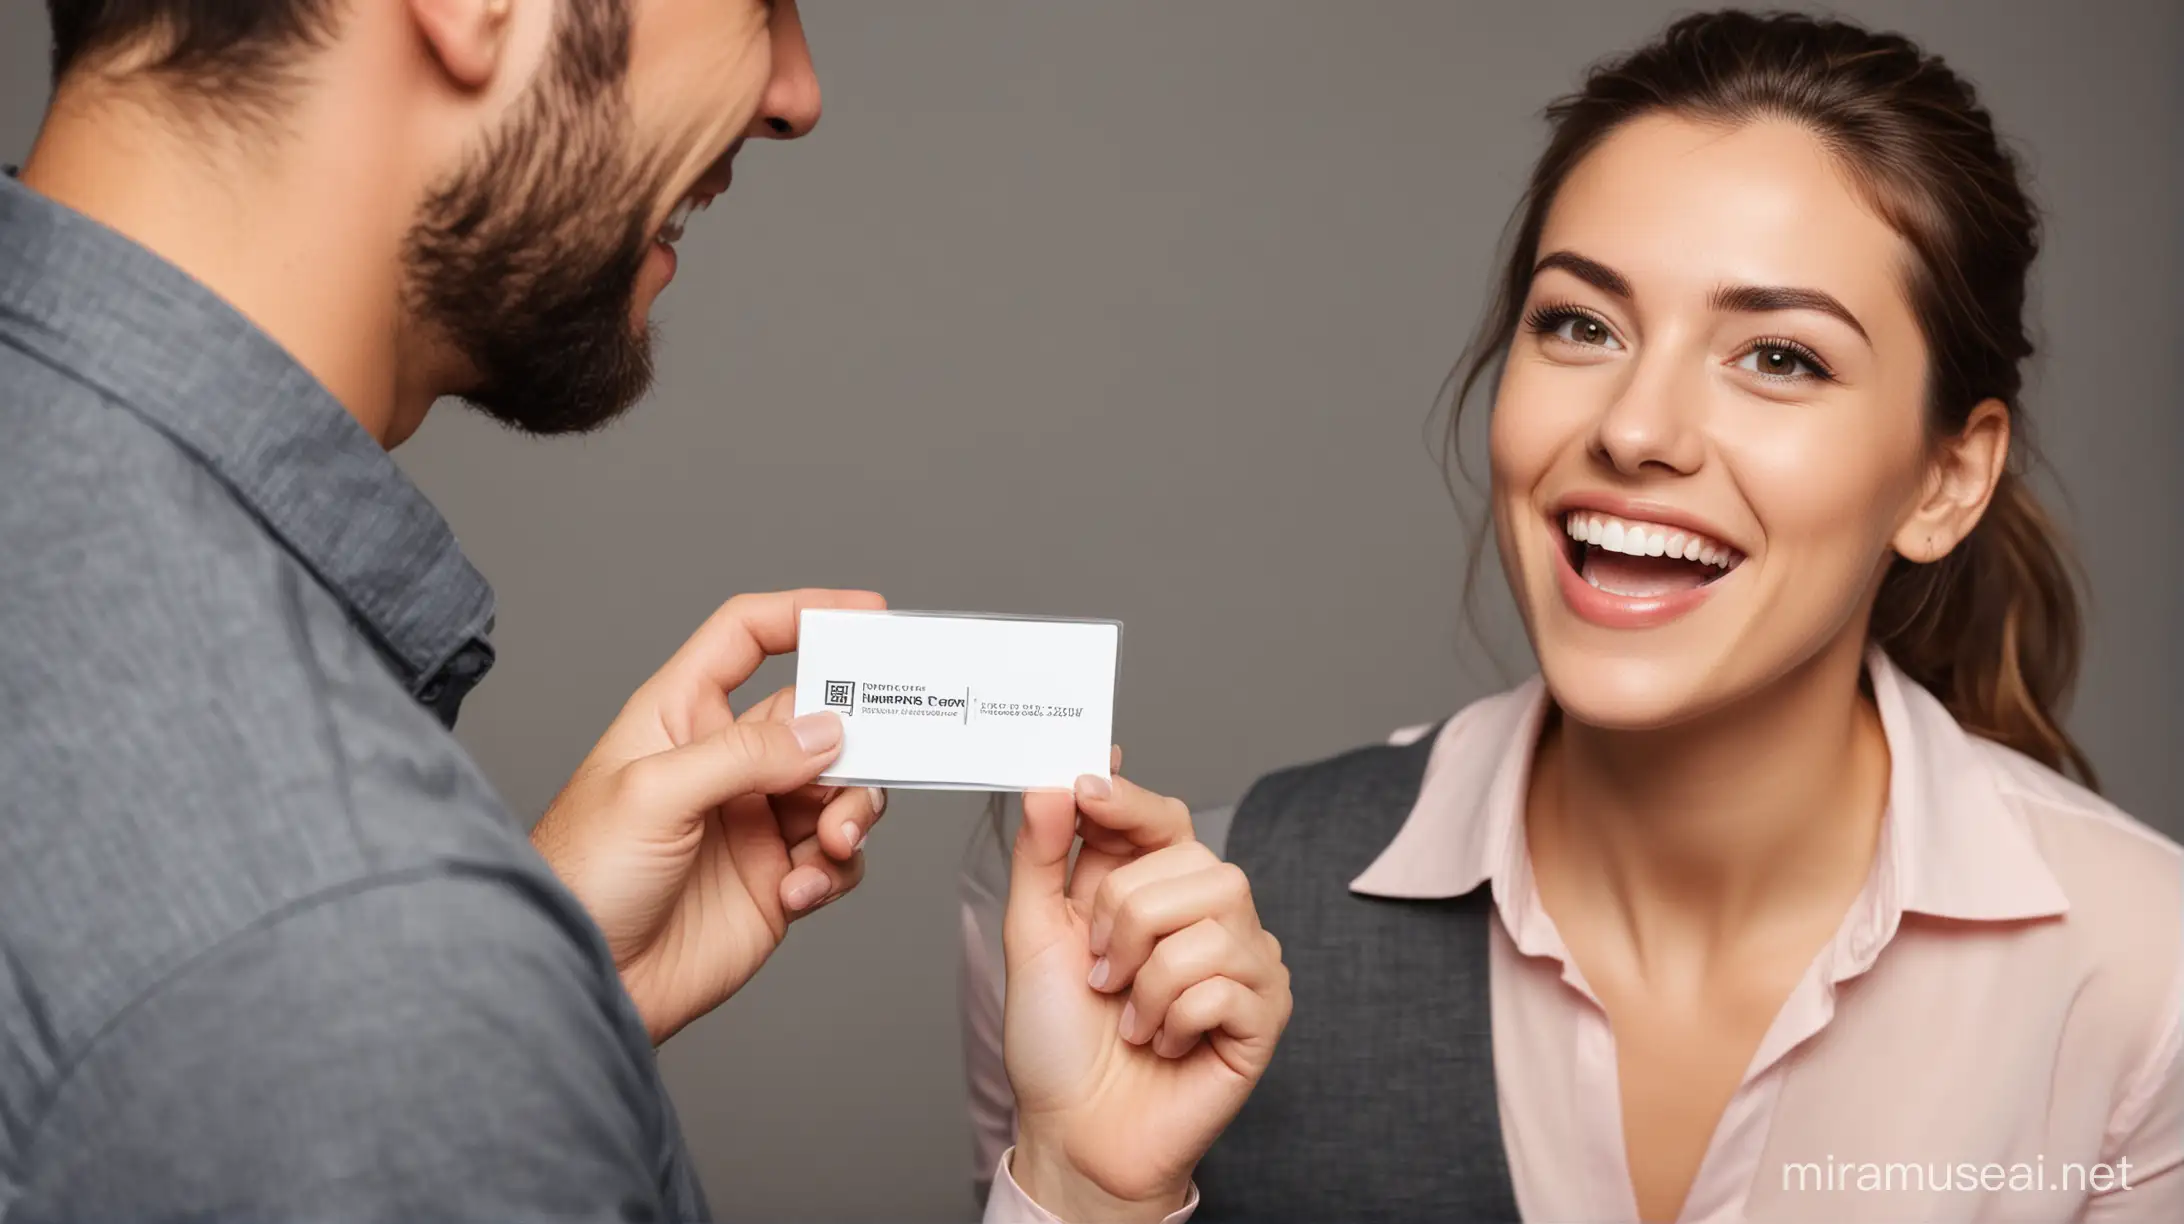 Excited Person Receiving and Viewing Business Card